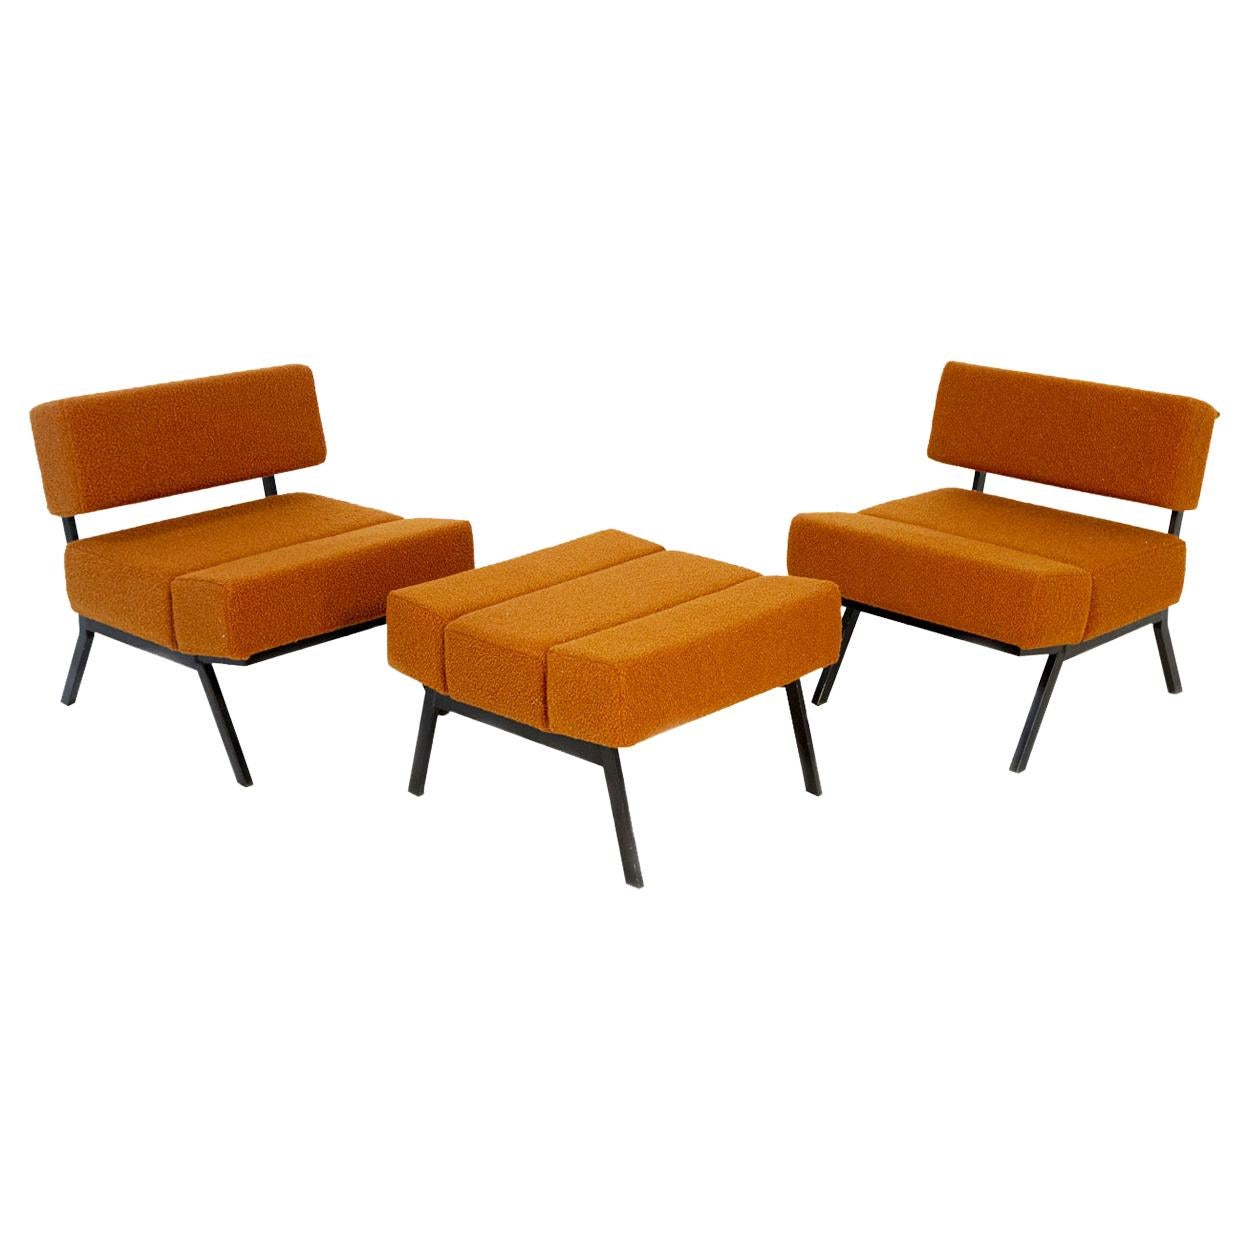 Set of Three Pieces by Rito Valla for IPE, 1960s